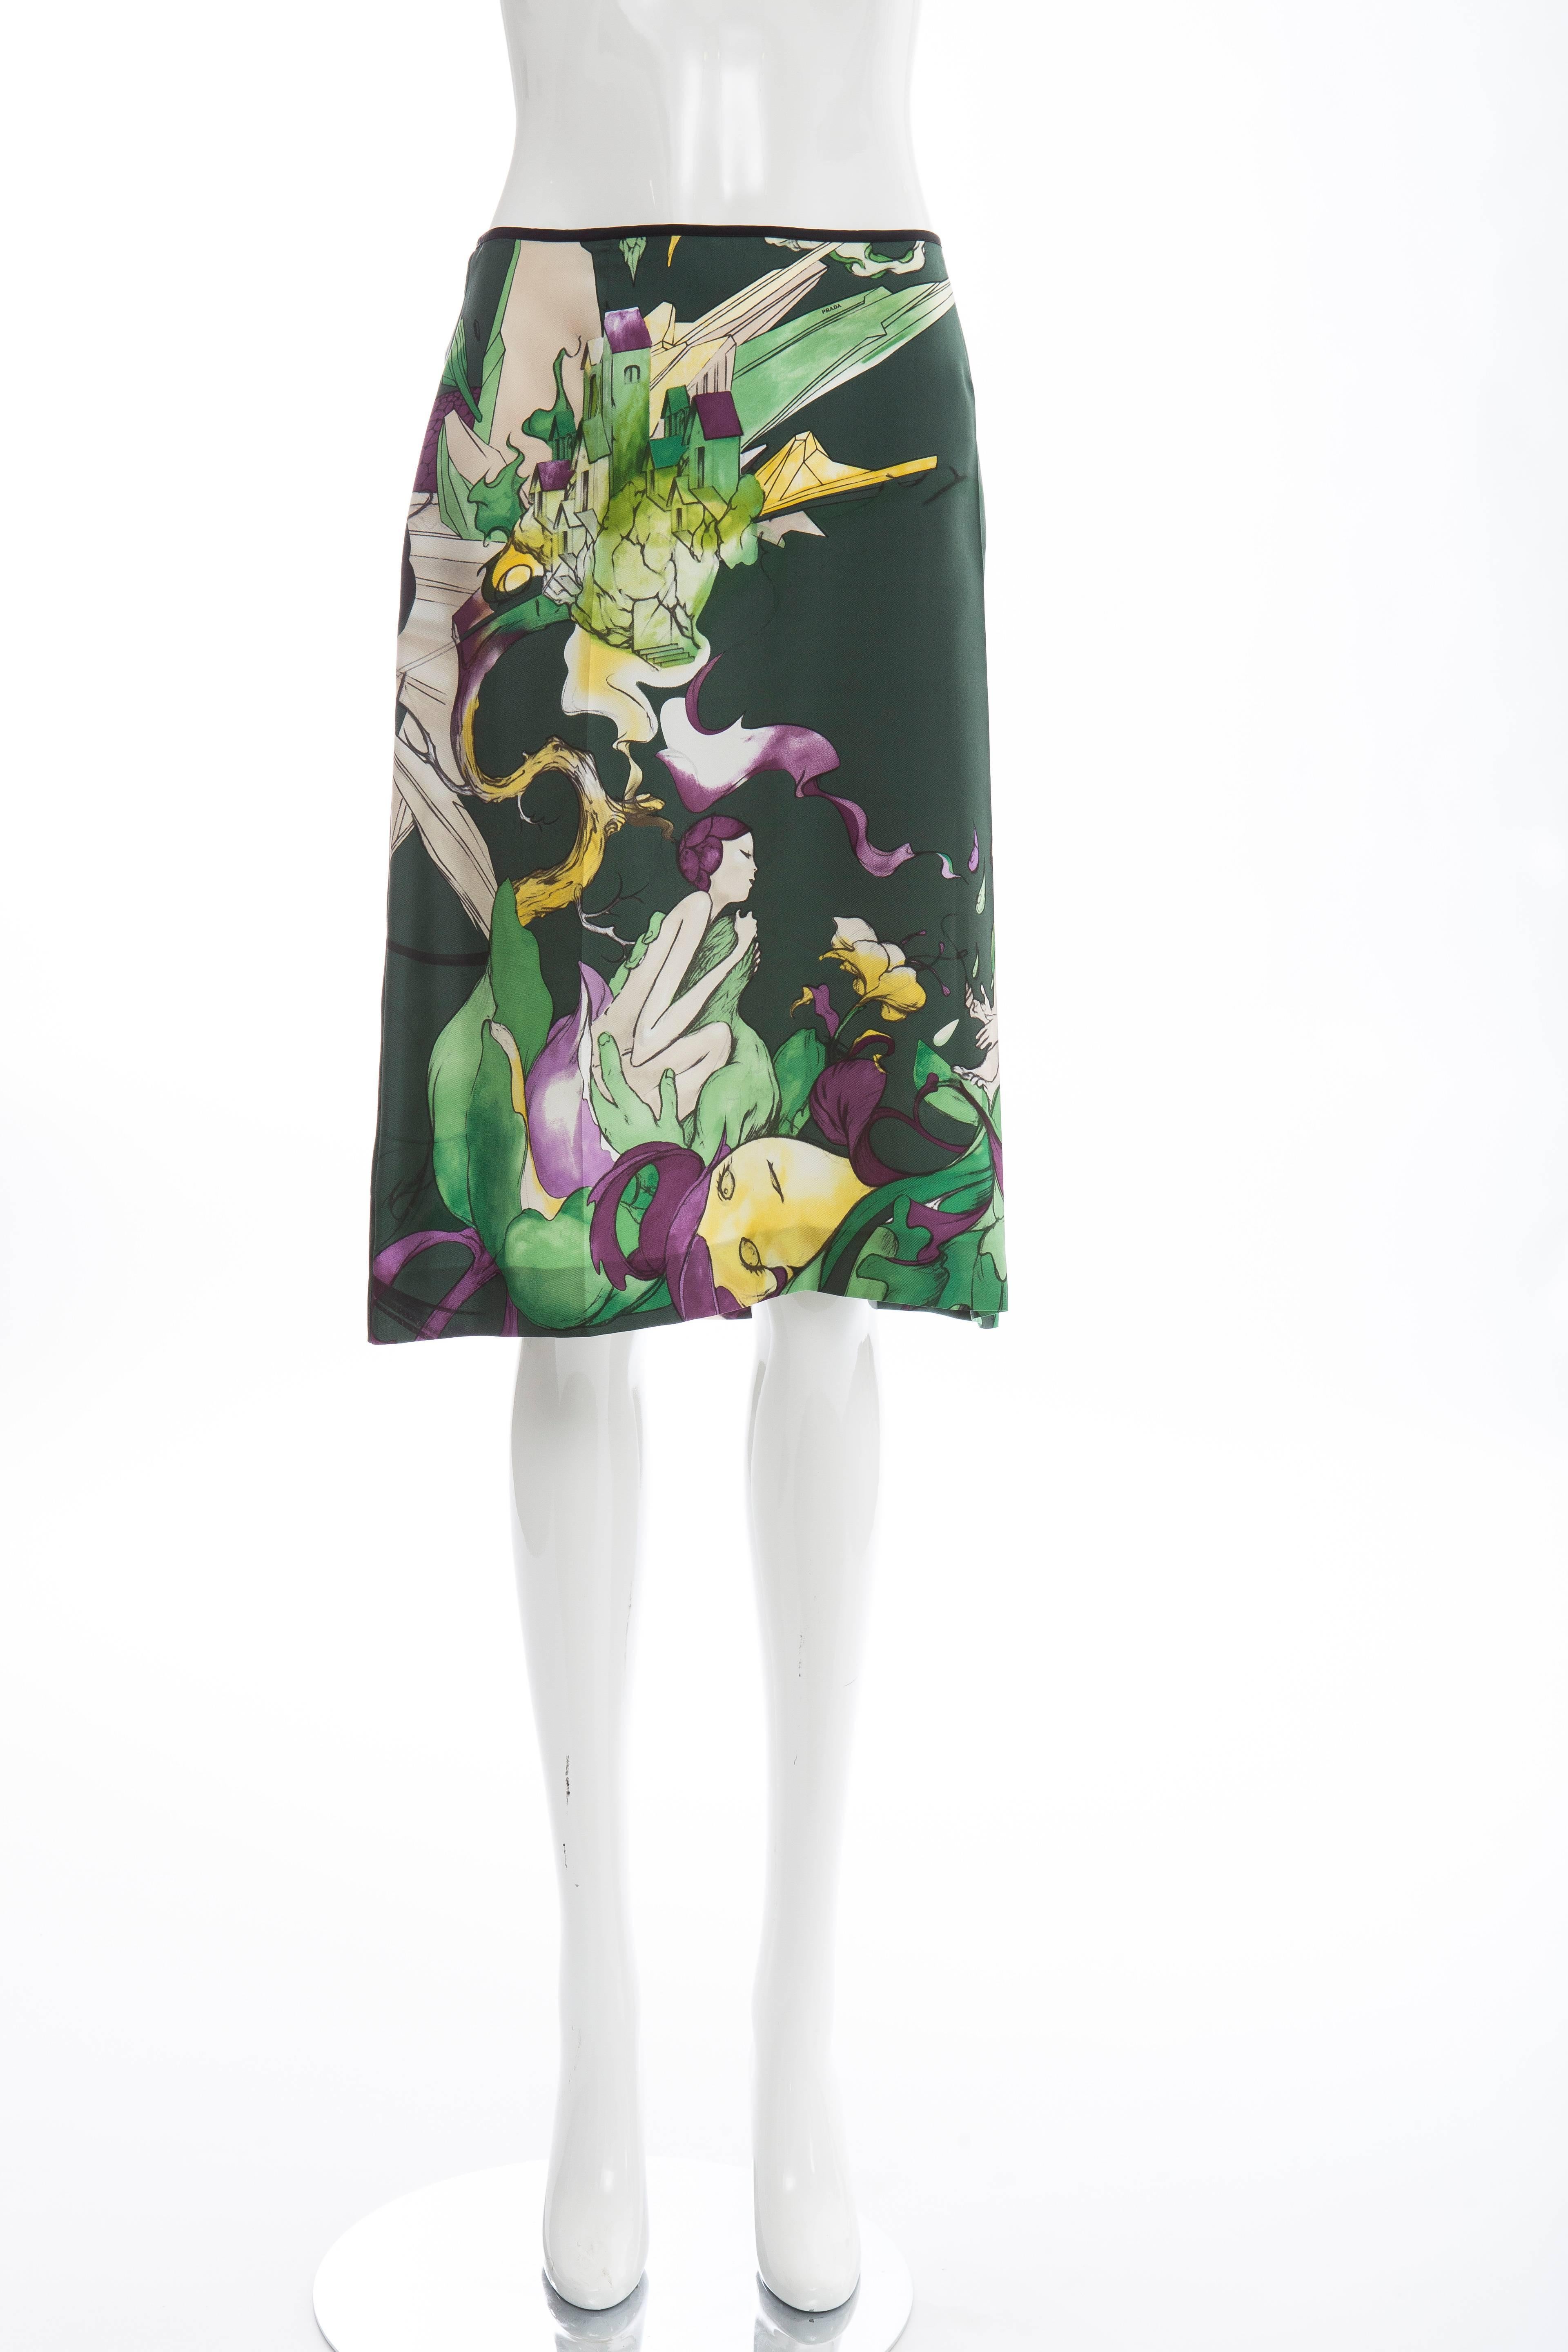 Prada, Spring-Summer 2008, high-waist silk skirt with James Jean fairy print throughout and concealed zip closure at side.

IT. 42
US. 6
Waist 30, Hip 38”, Length 25”